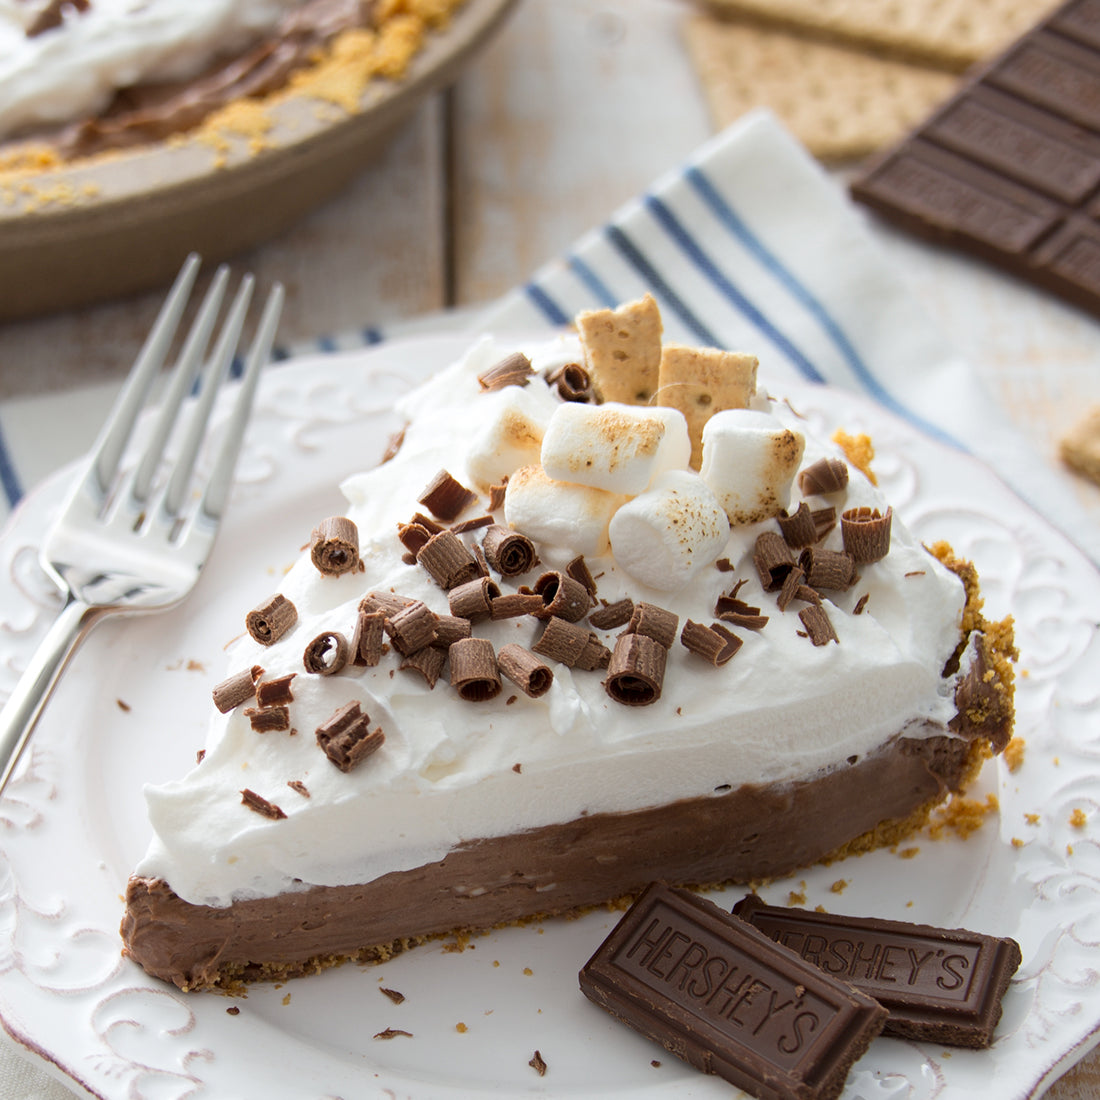 S'mores No-Bake Cheesecake in pie dish garnished with chocolate shavings and toasted marshmallows.